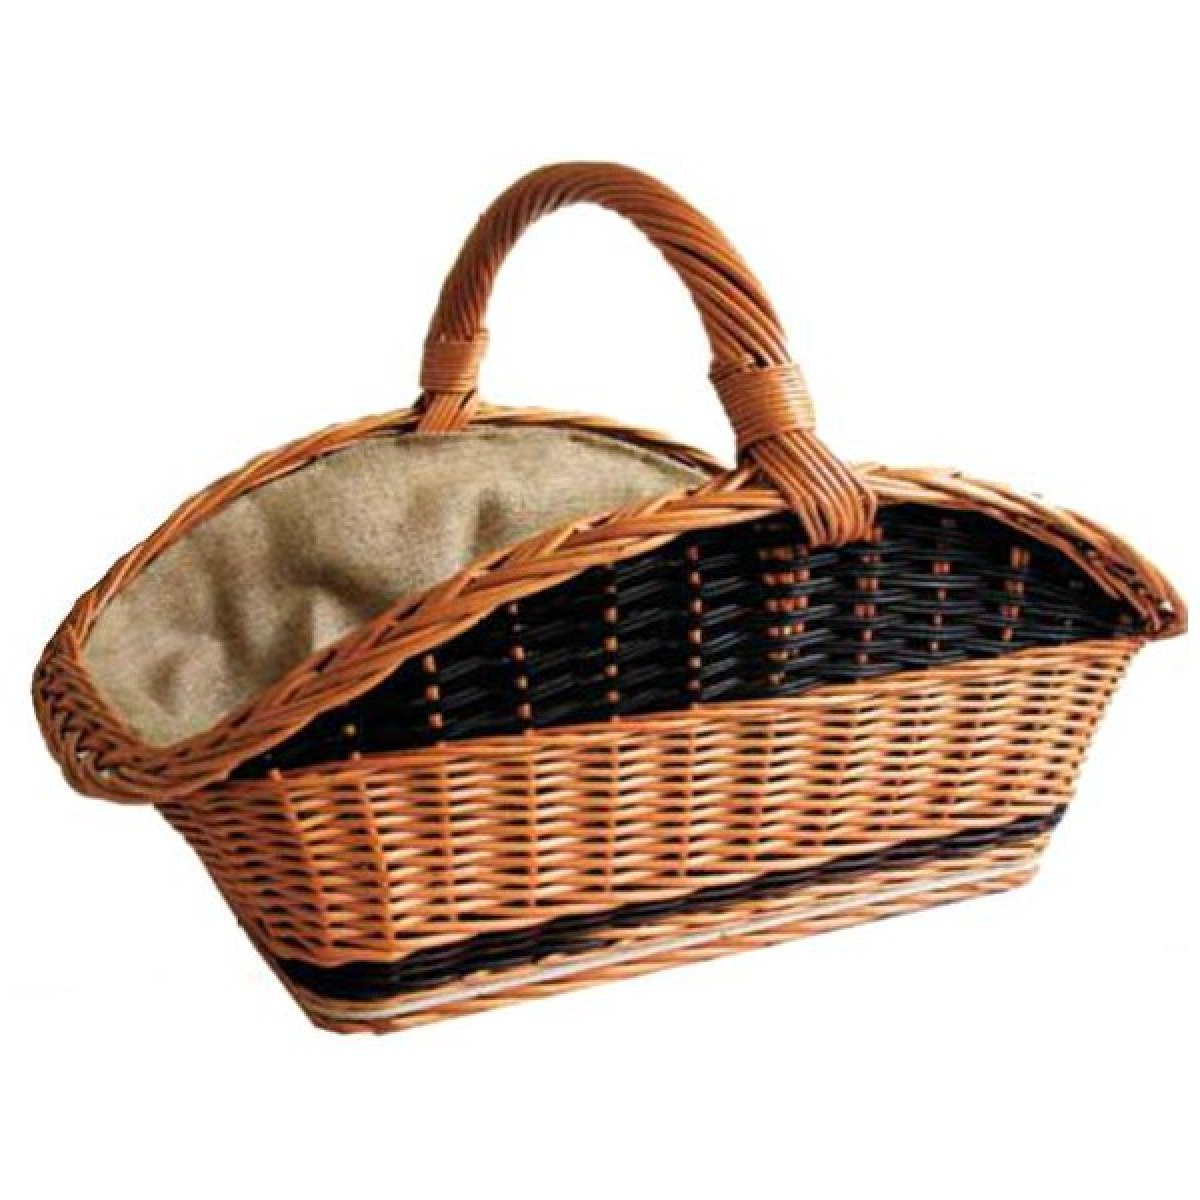 Wood basket with canvas